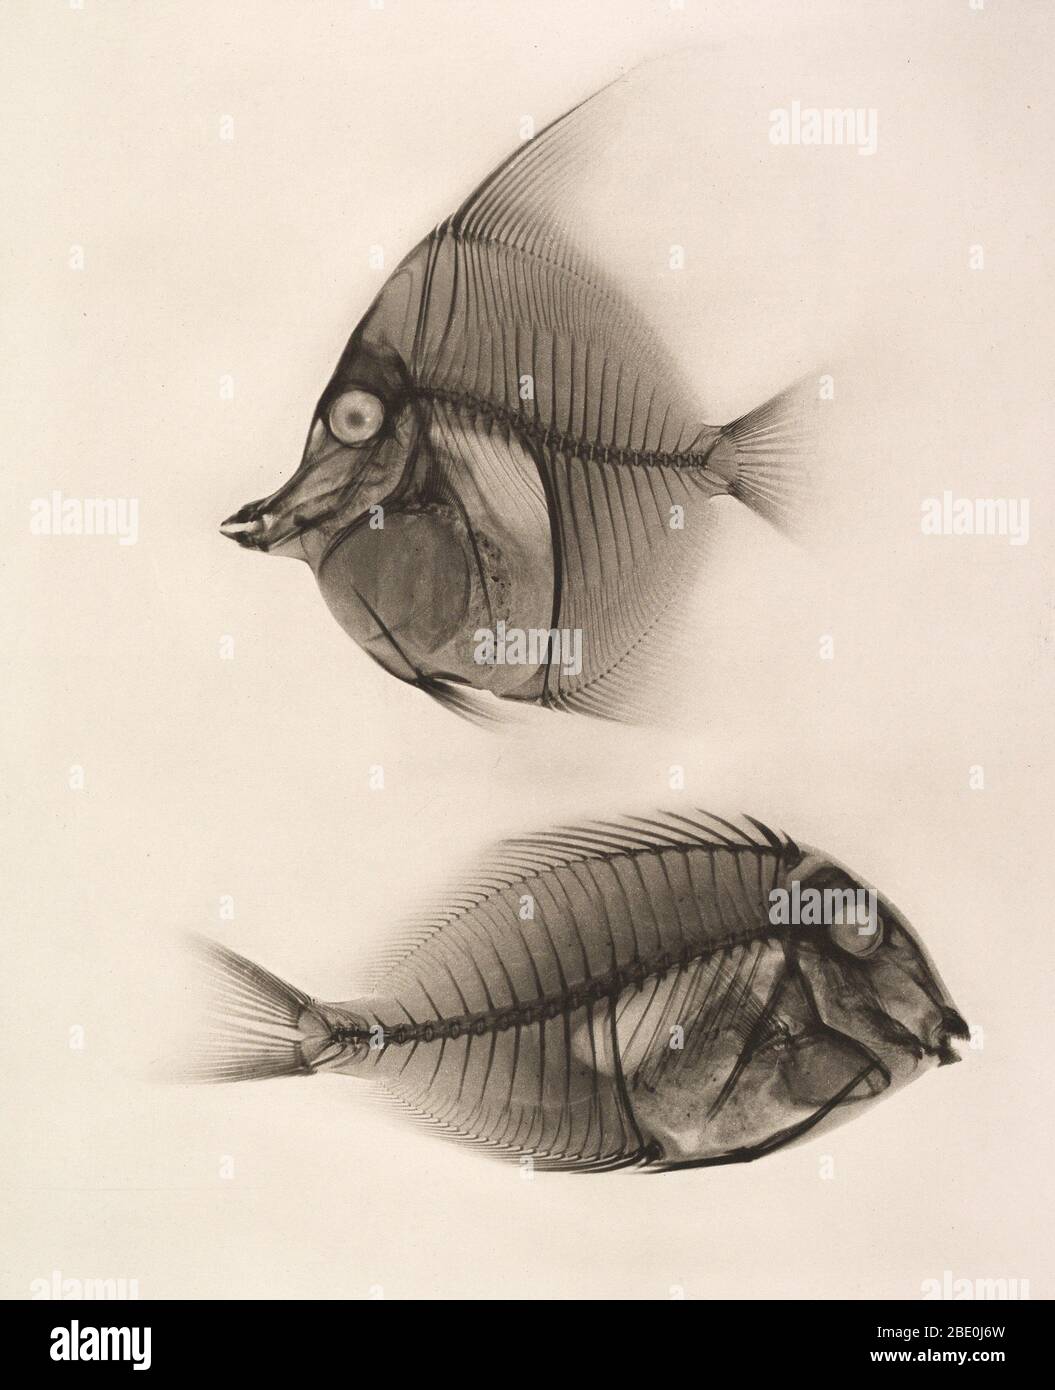 Historical X-ray of the Moorish idol (Zanclus cornutus), and Bluelined surgeonfish (Acanthurus nigros), 1896. Taken by Josef Maria Eder (Austrian, 1855-1944) and Eduard Valenta (Austrian, 1857-1937). Photogravure. Eder was the director of an institute for graphic processes and the author of an early history of photography. With the photochemist Valenta, he produced a portfolio in January 1896, less than a month after Wilhelm Conrad Rontgen published his discovery of X-rays. Eder and Valenta's volume, from which this plate derives, demonstrated the X-ray's magical ability to reveal the hidden s Stock Photo